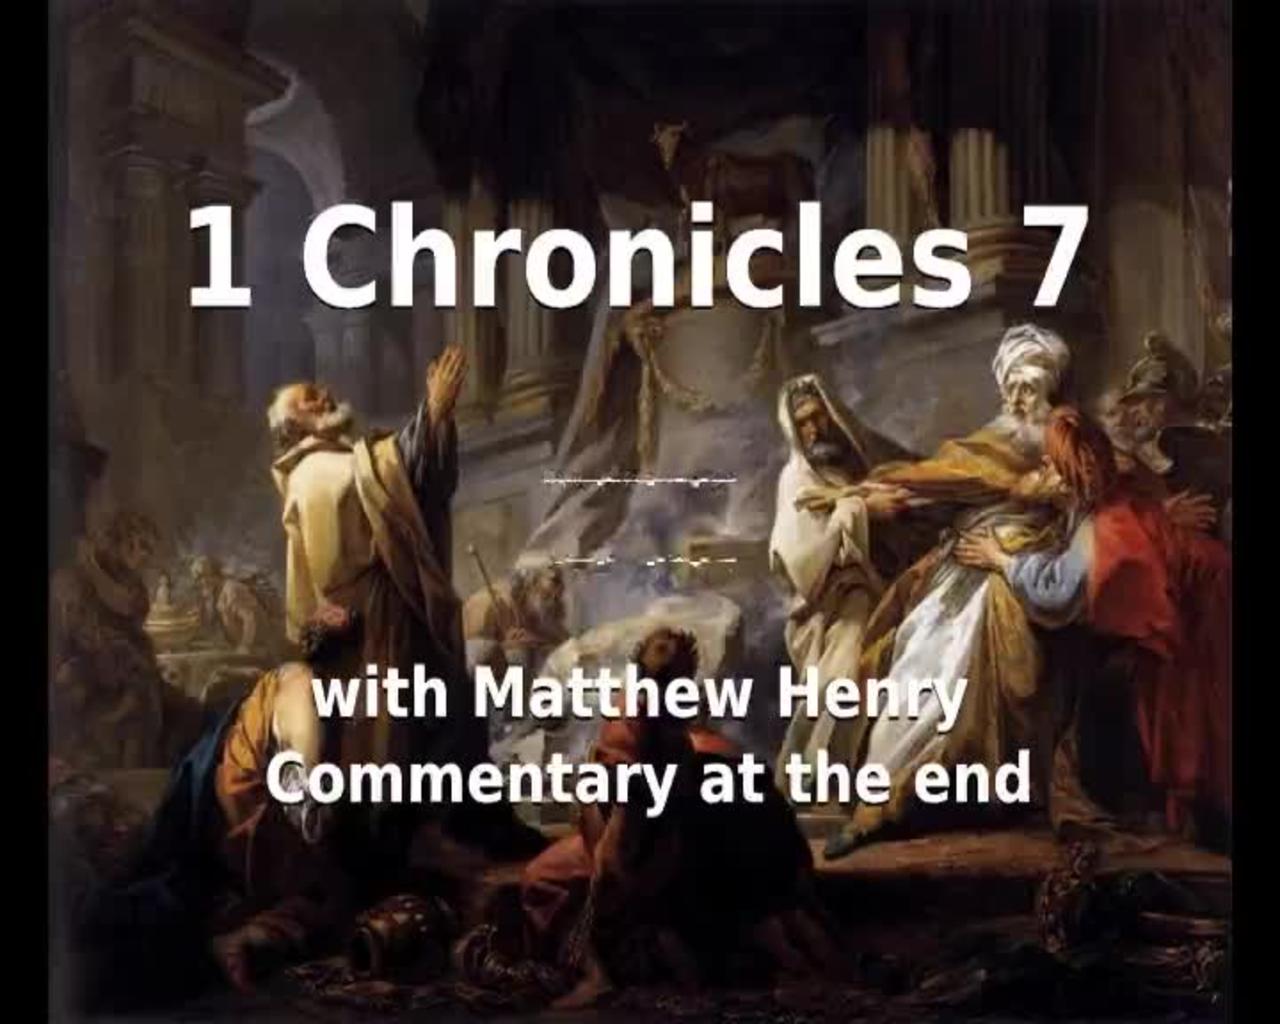 📖🕯 Holy Bible - 1 Chronicles 7 with Matthew Henry Commentary at the end.